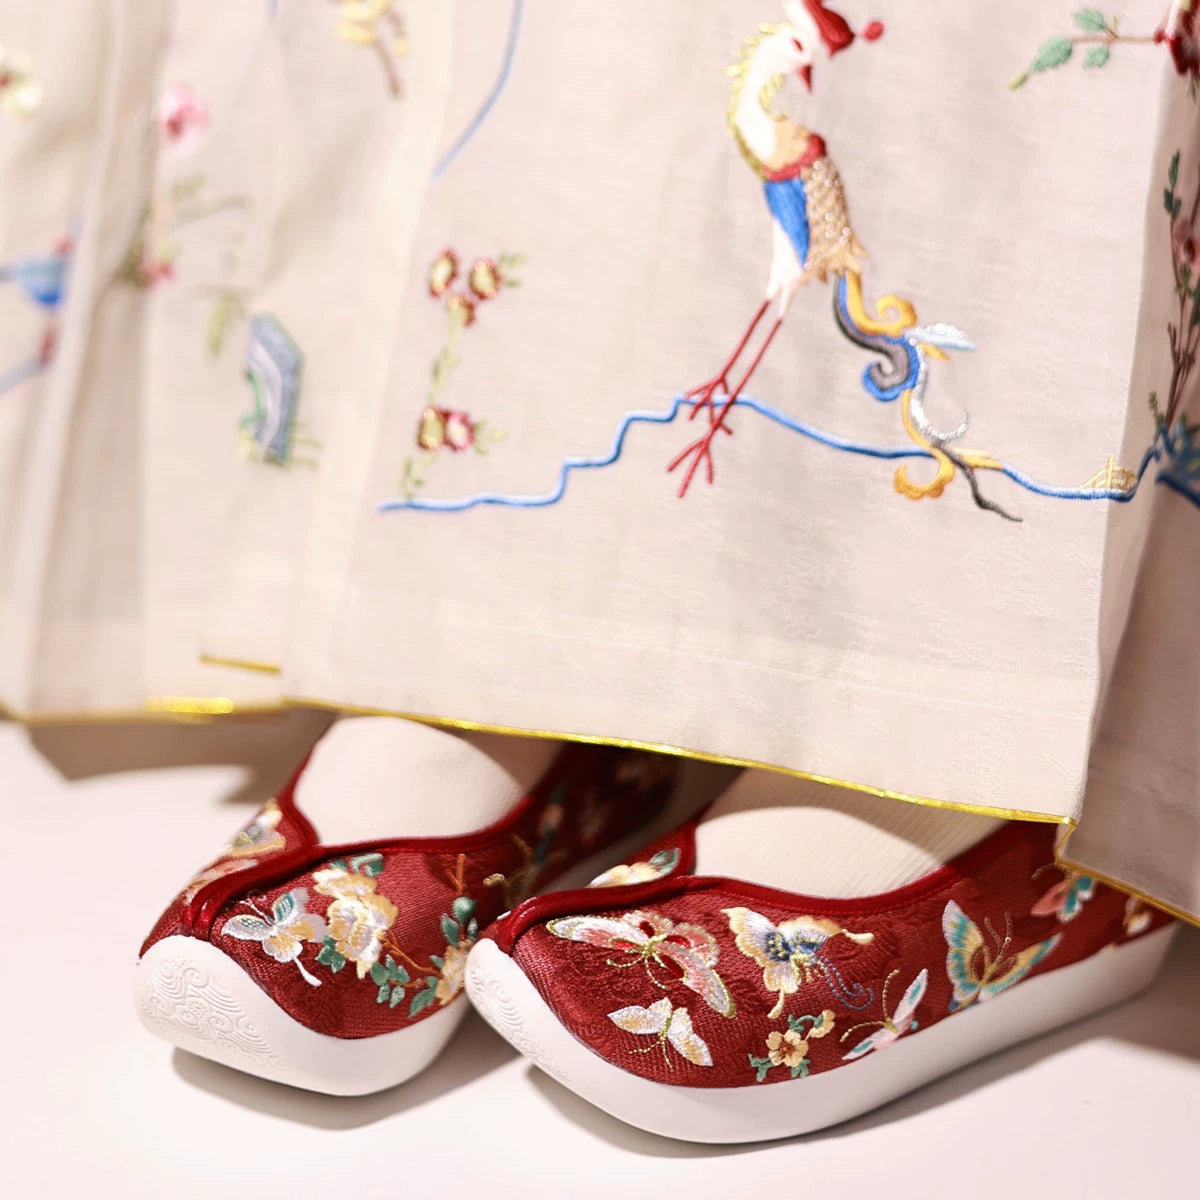 Yun Bu 云步 Hundred Butterfly Embroidered Song Ming Gong Xie Shoes